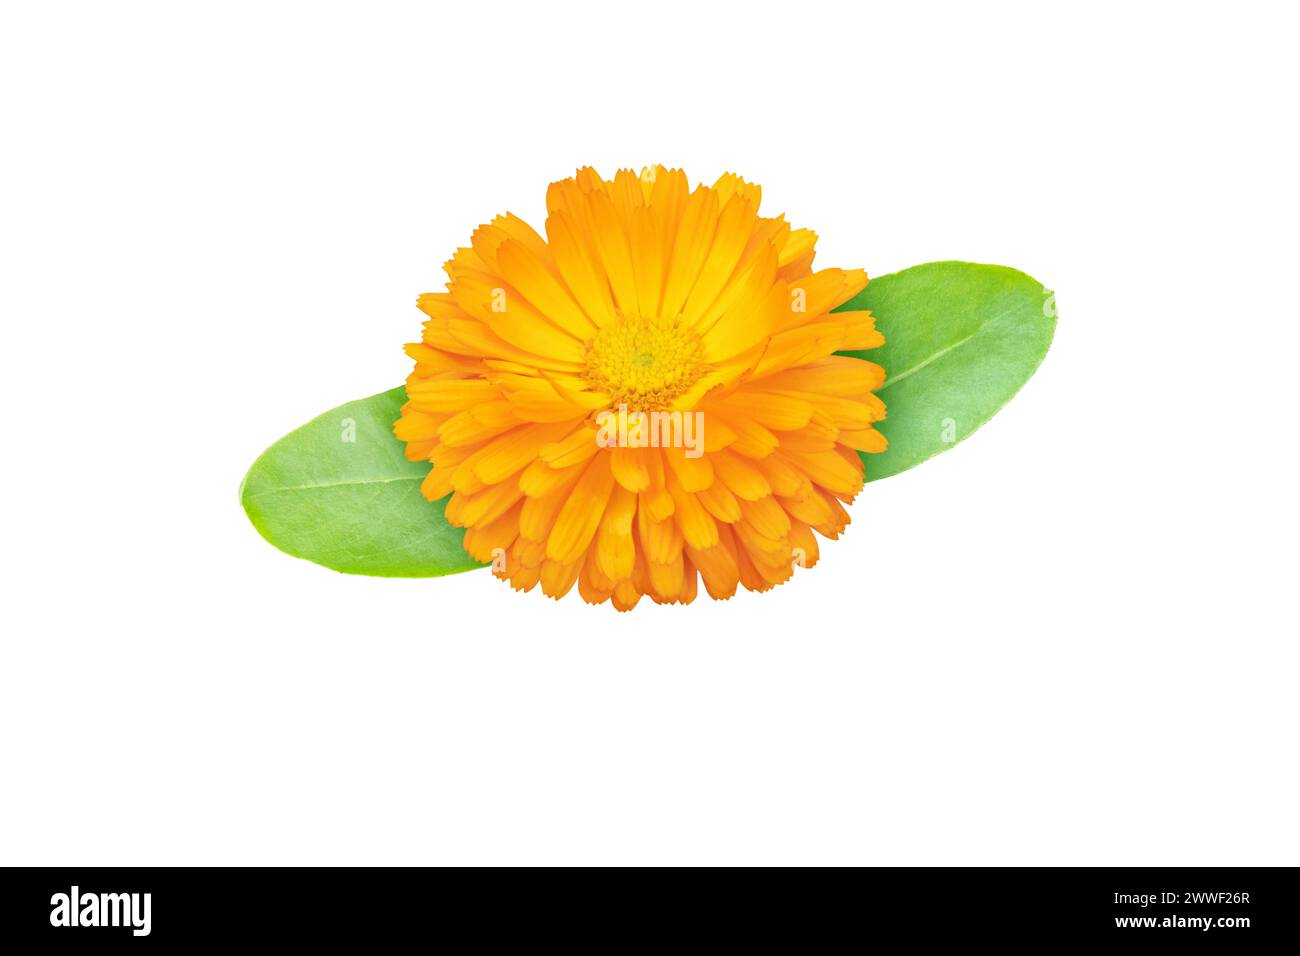 Calendula officinalis bright orange flower with leaves isolated on white. Marigold flowering medicinal plant. Stock Photo